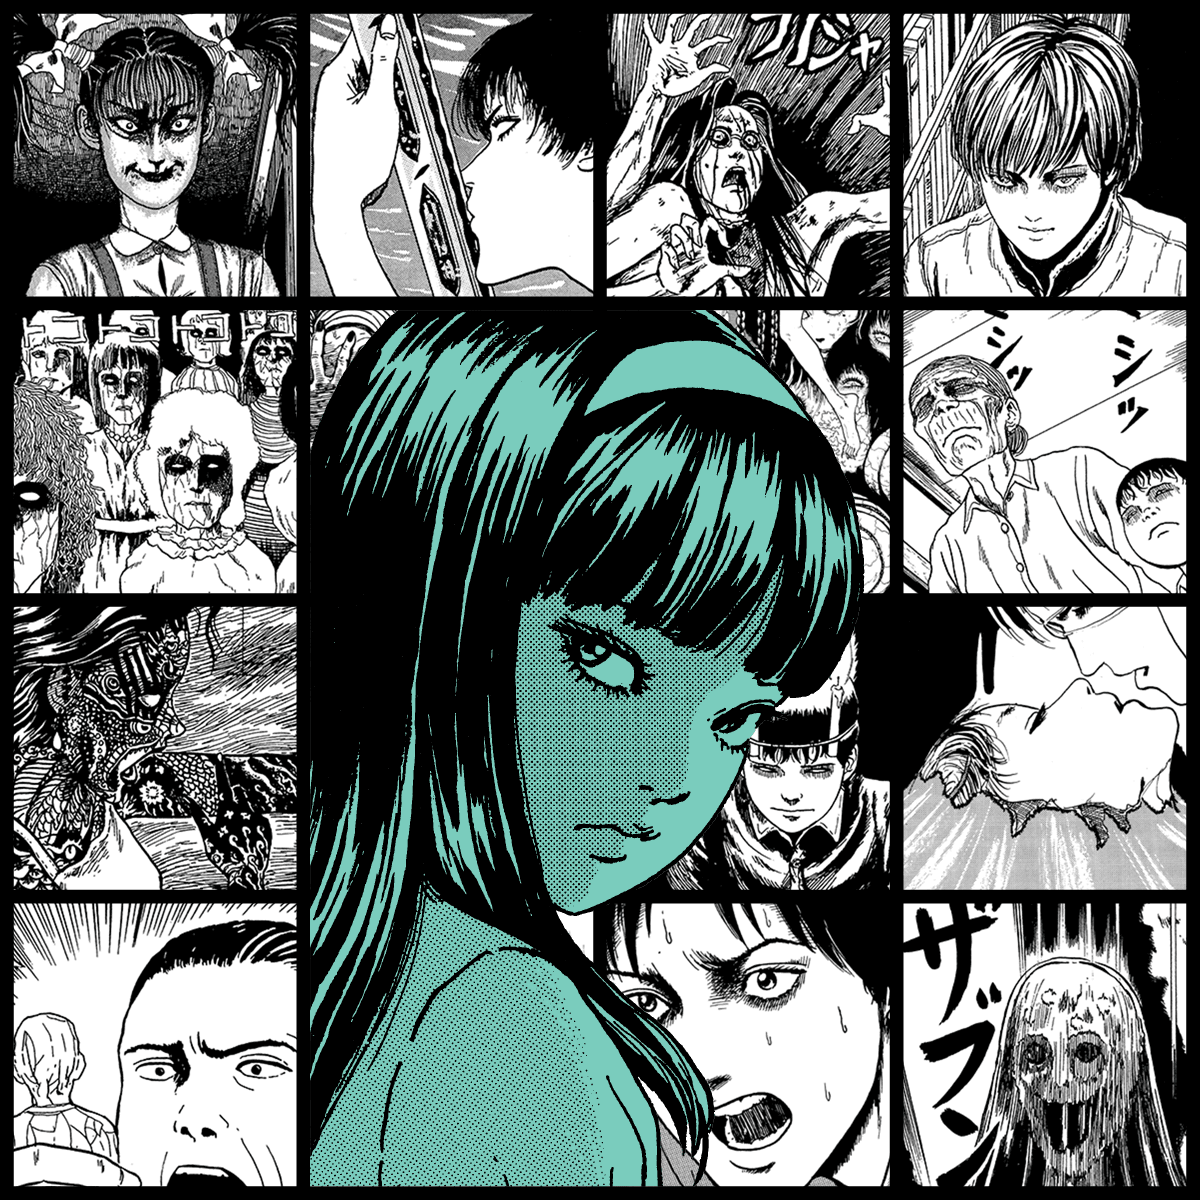 TOMIE by Junji Ito #296